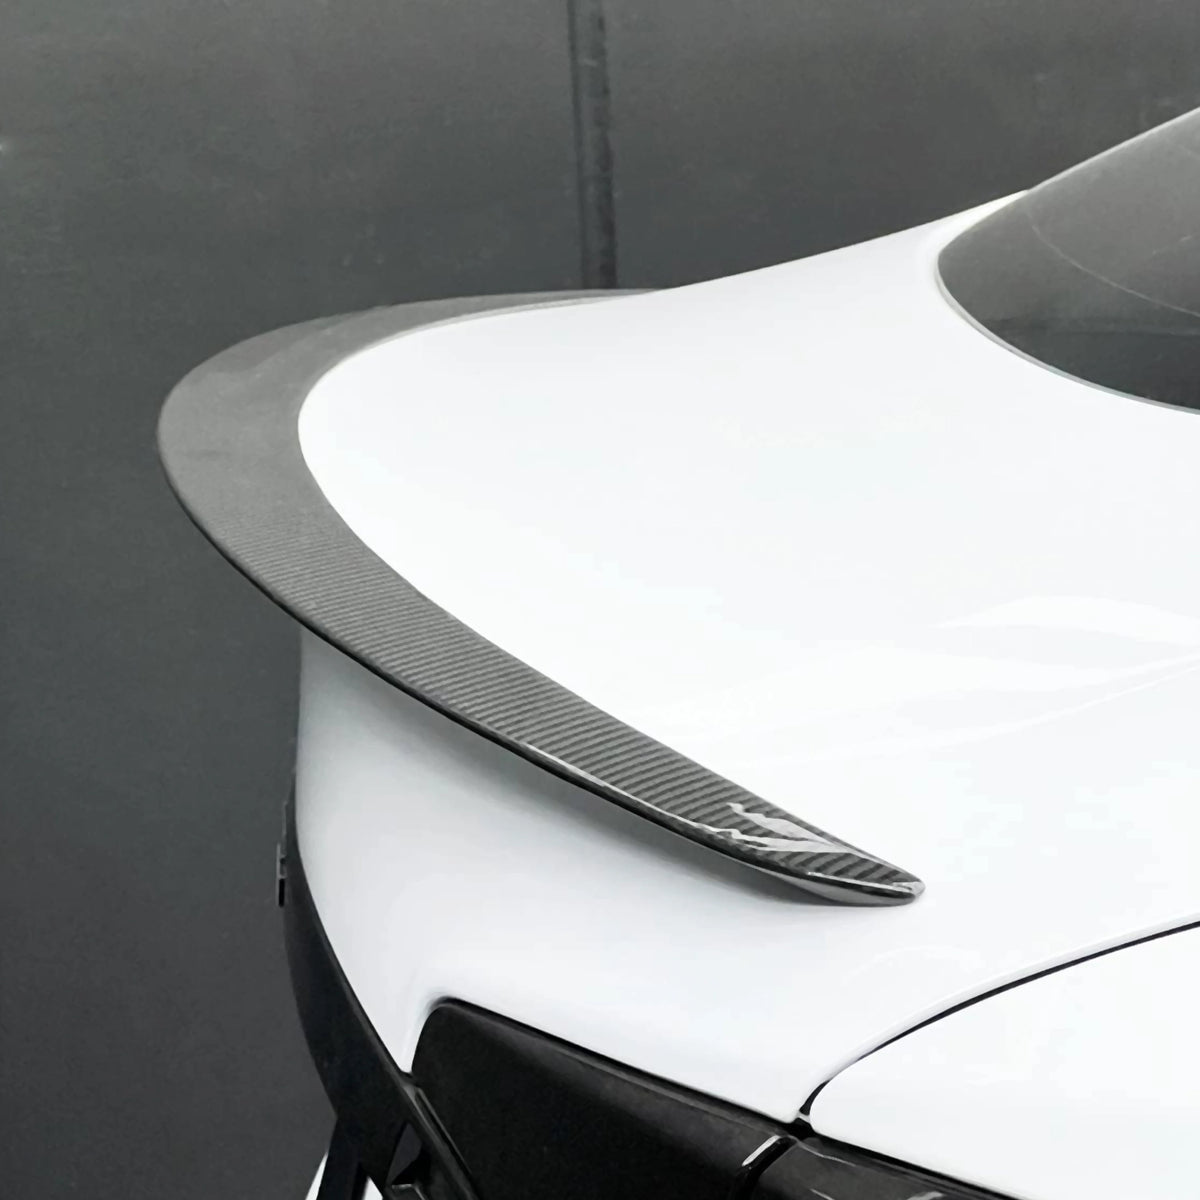 Adreama Tesla Model S Performance Spoiler Made With Real Premium Carbon Fiber - Glossy Finish